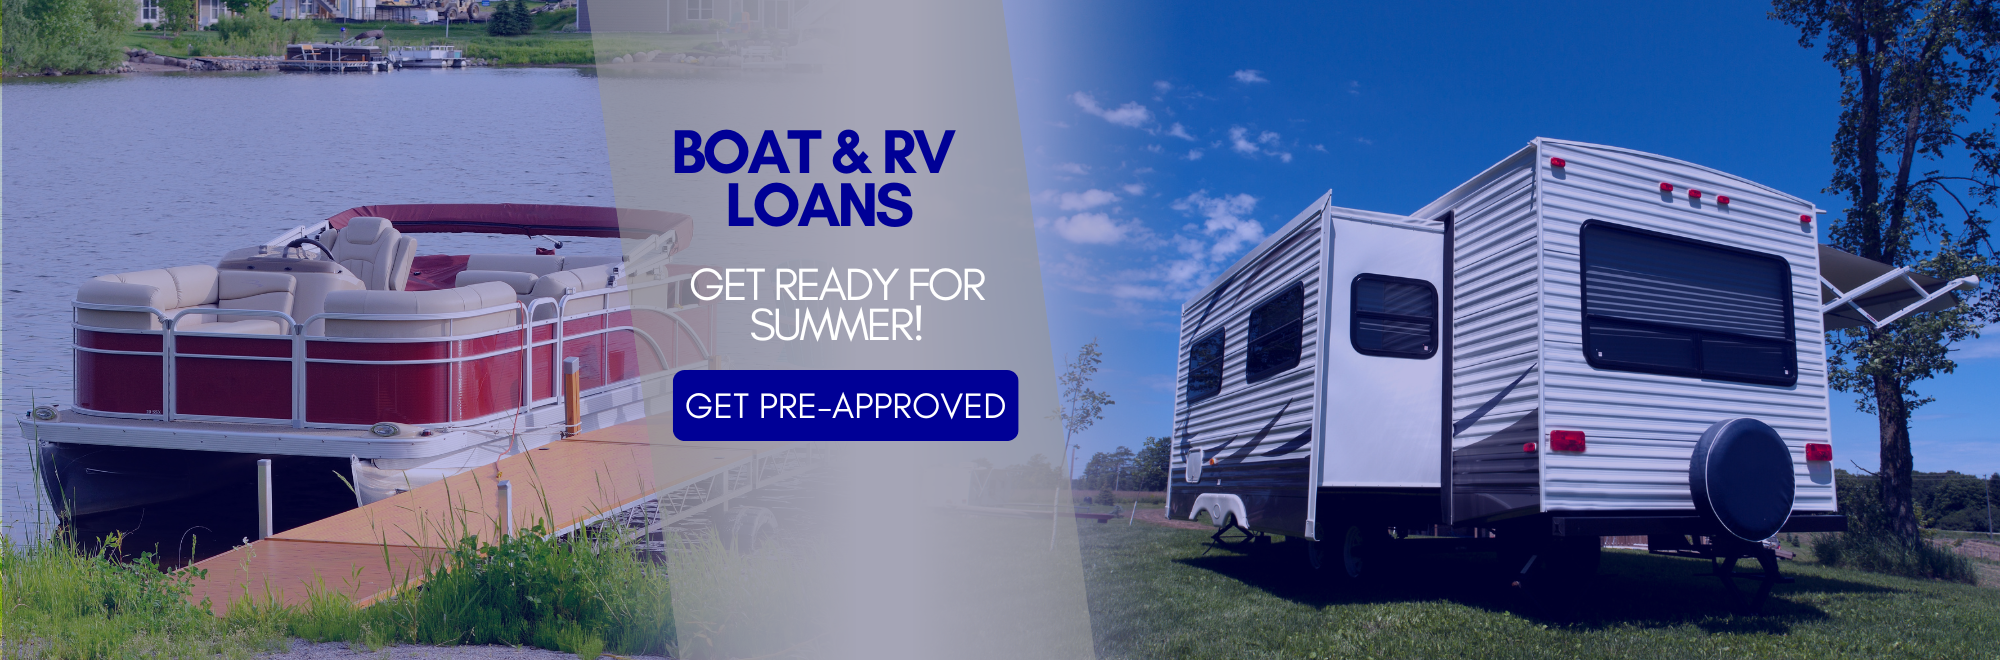 Boat & Rv Loans  Get ready for summer!  Get Pre-Approved